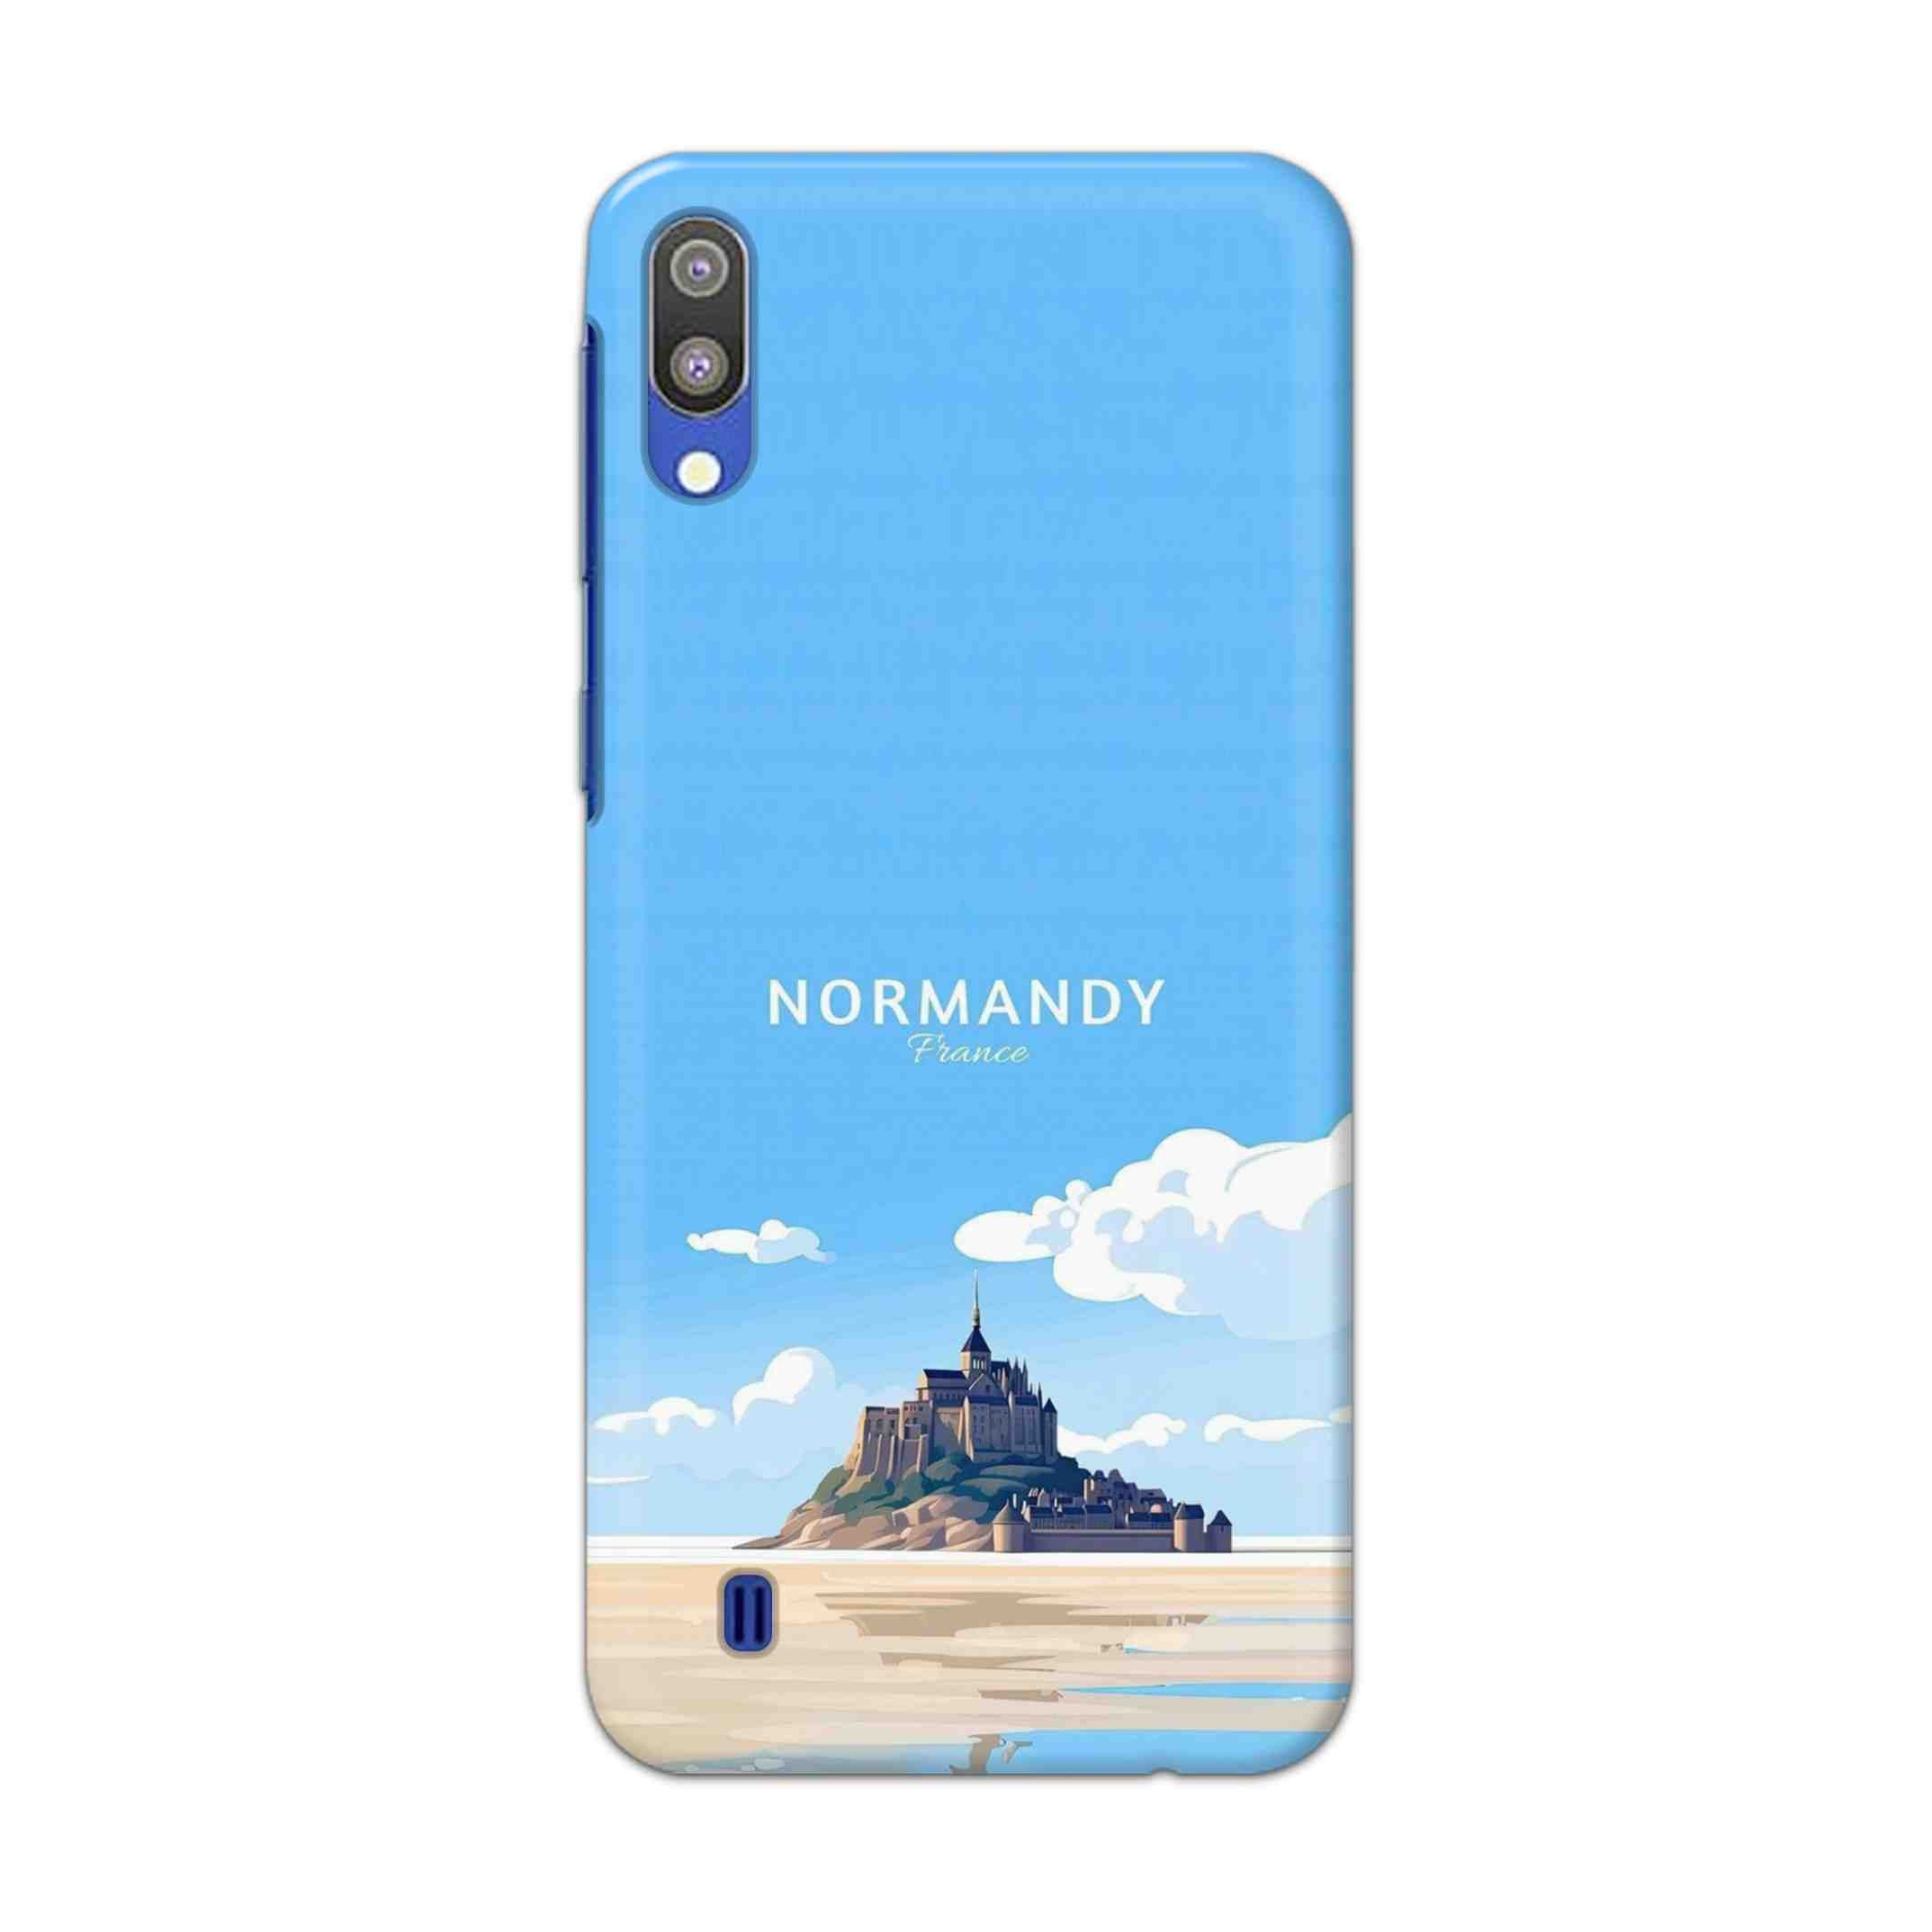 Buy Normandy Hard Back Mobile Phone Case Cover For Samsung Galaxy M10 Online